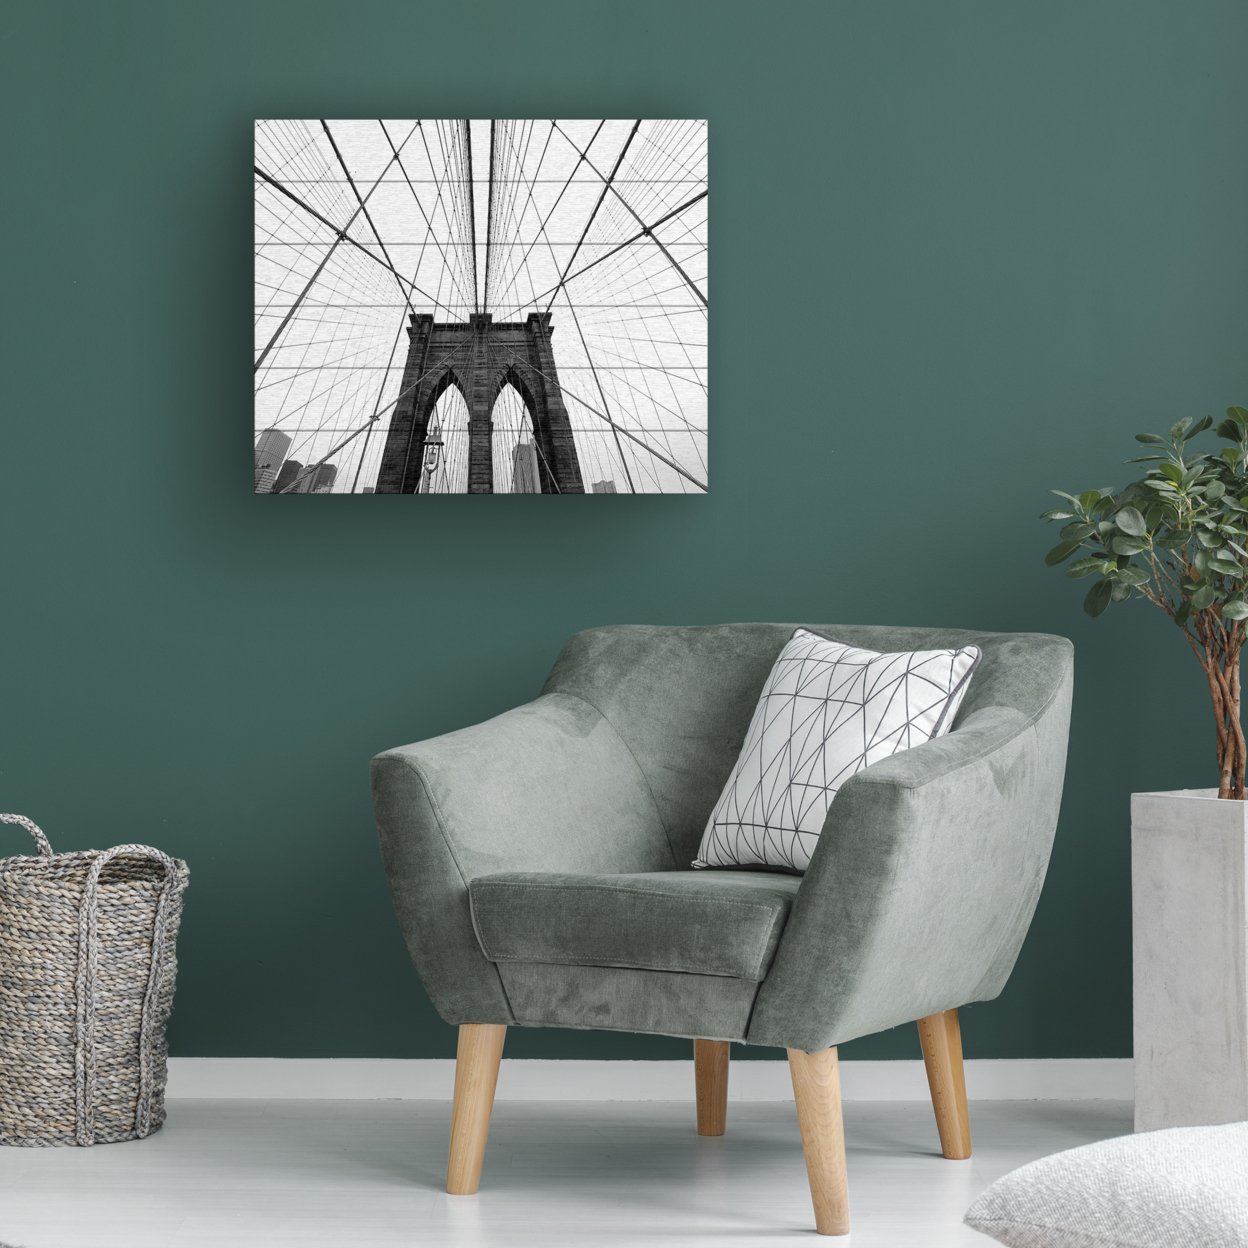 Wooden Slat Art 18 X 22 Inches Titled NYC Brooklyn Bridge Ready To Hang Home Decor Picture